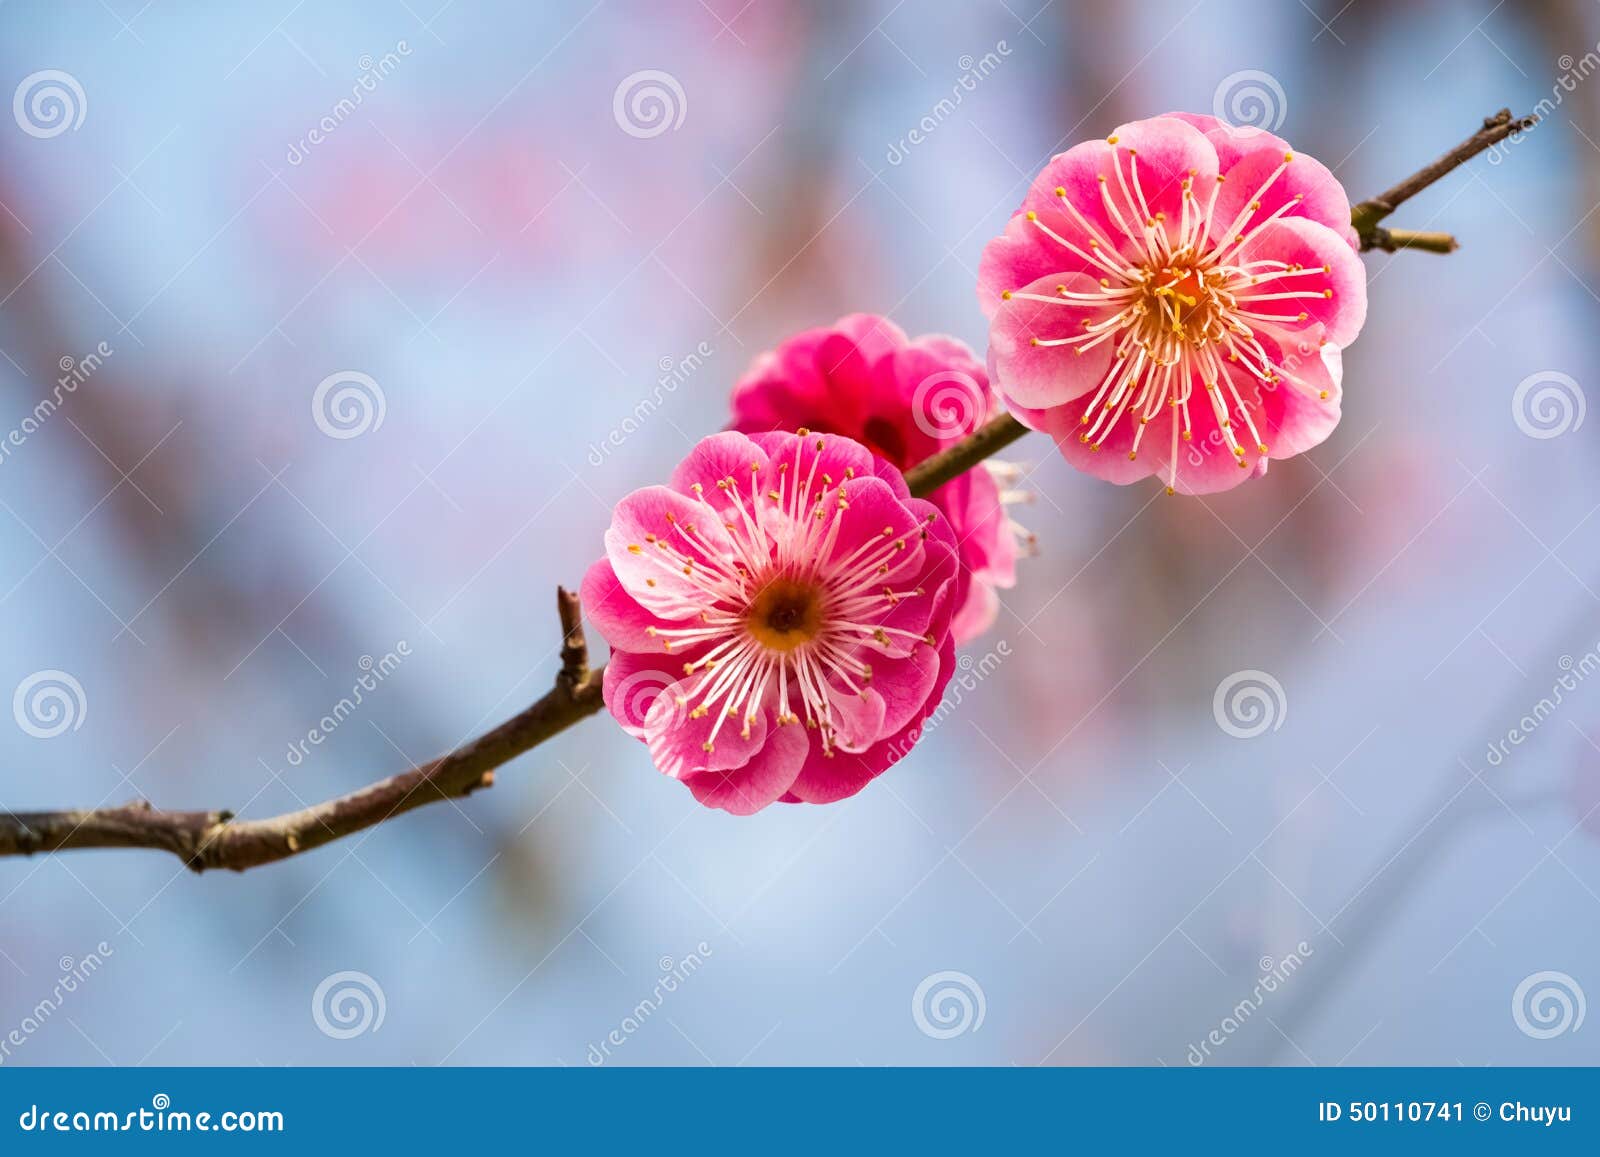 two red plum flowers